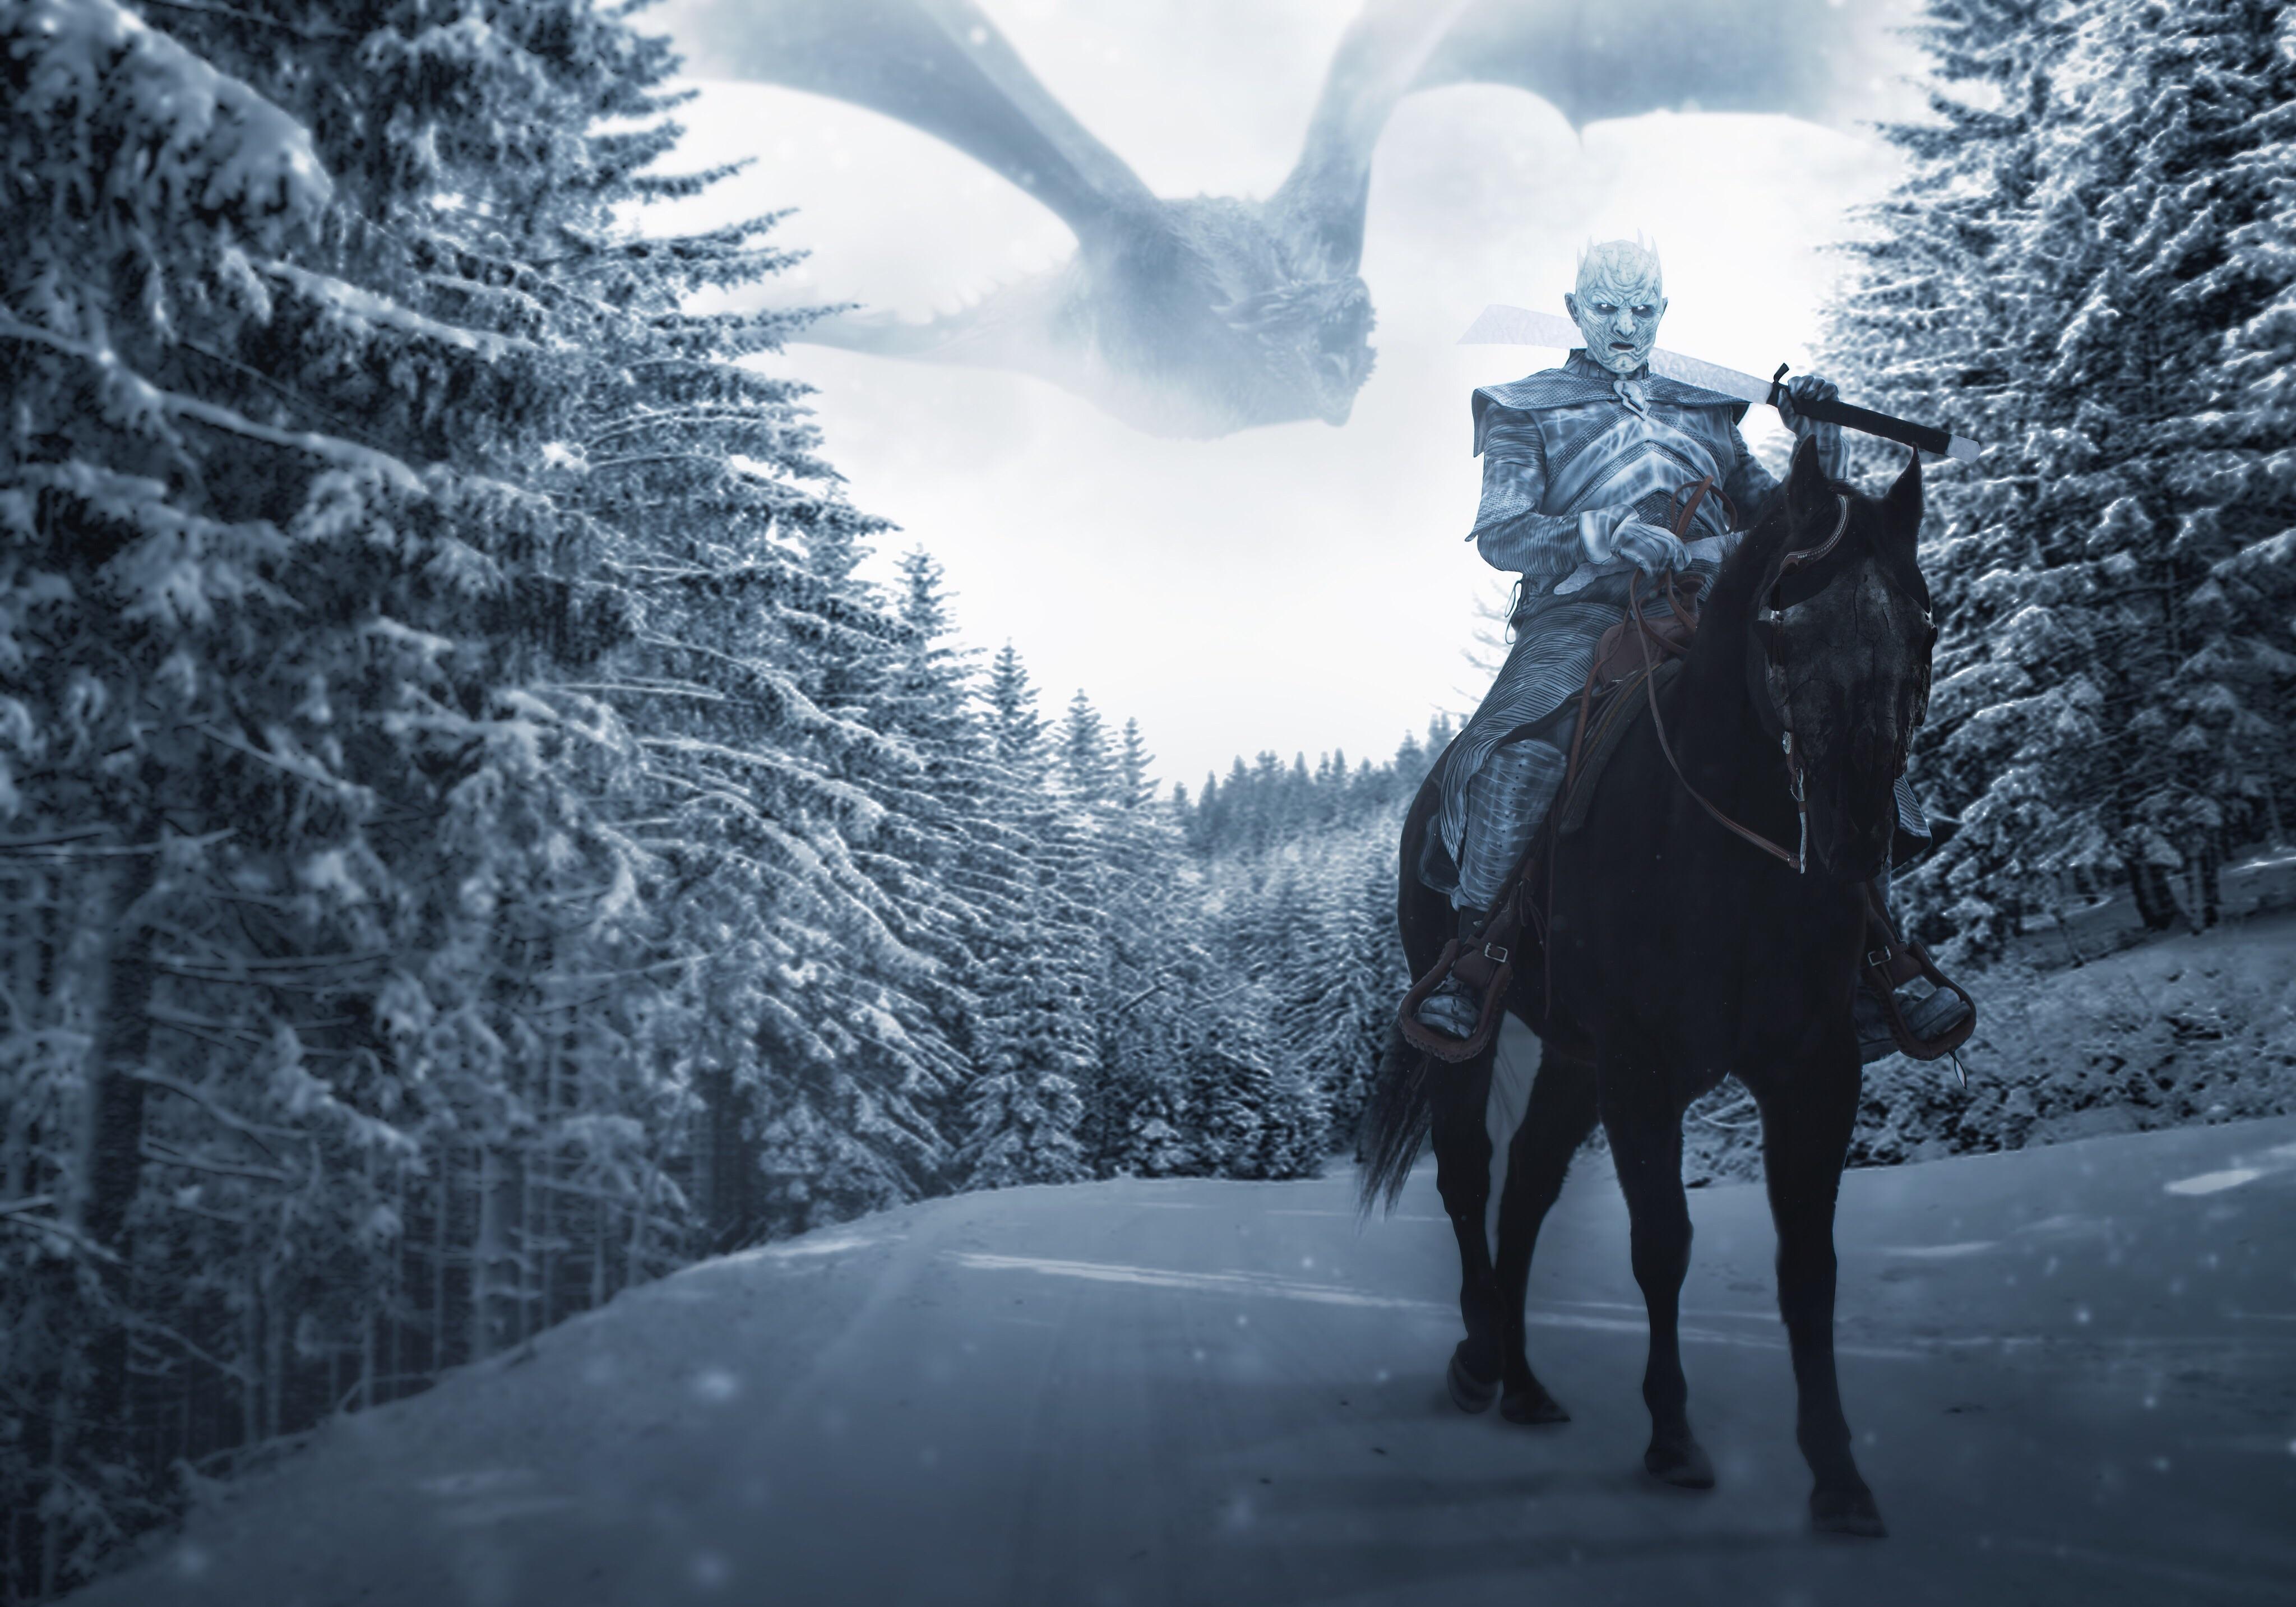 Night King Game Of Thrones Season 8 Hd Tv Shows 4k Wallpapers Images Backgrounds Photos And